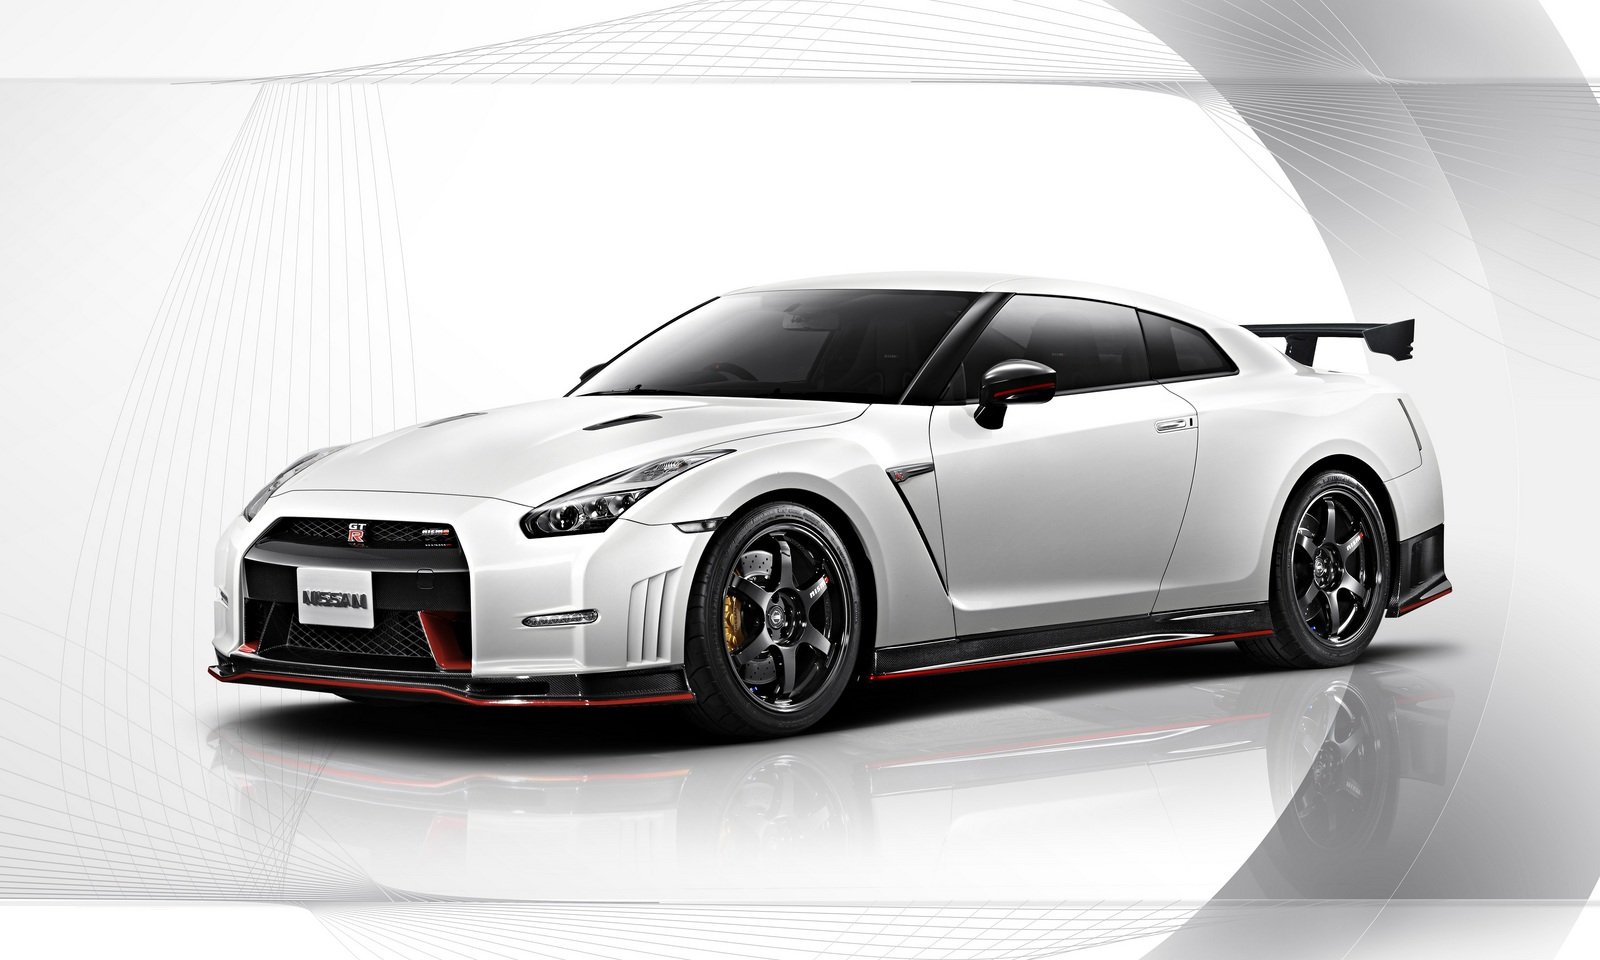 HQ 2015 Nissan GT-R NISMO Wallpapers | File 163.36Kb